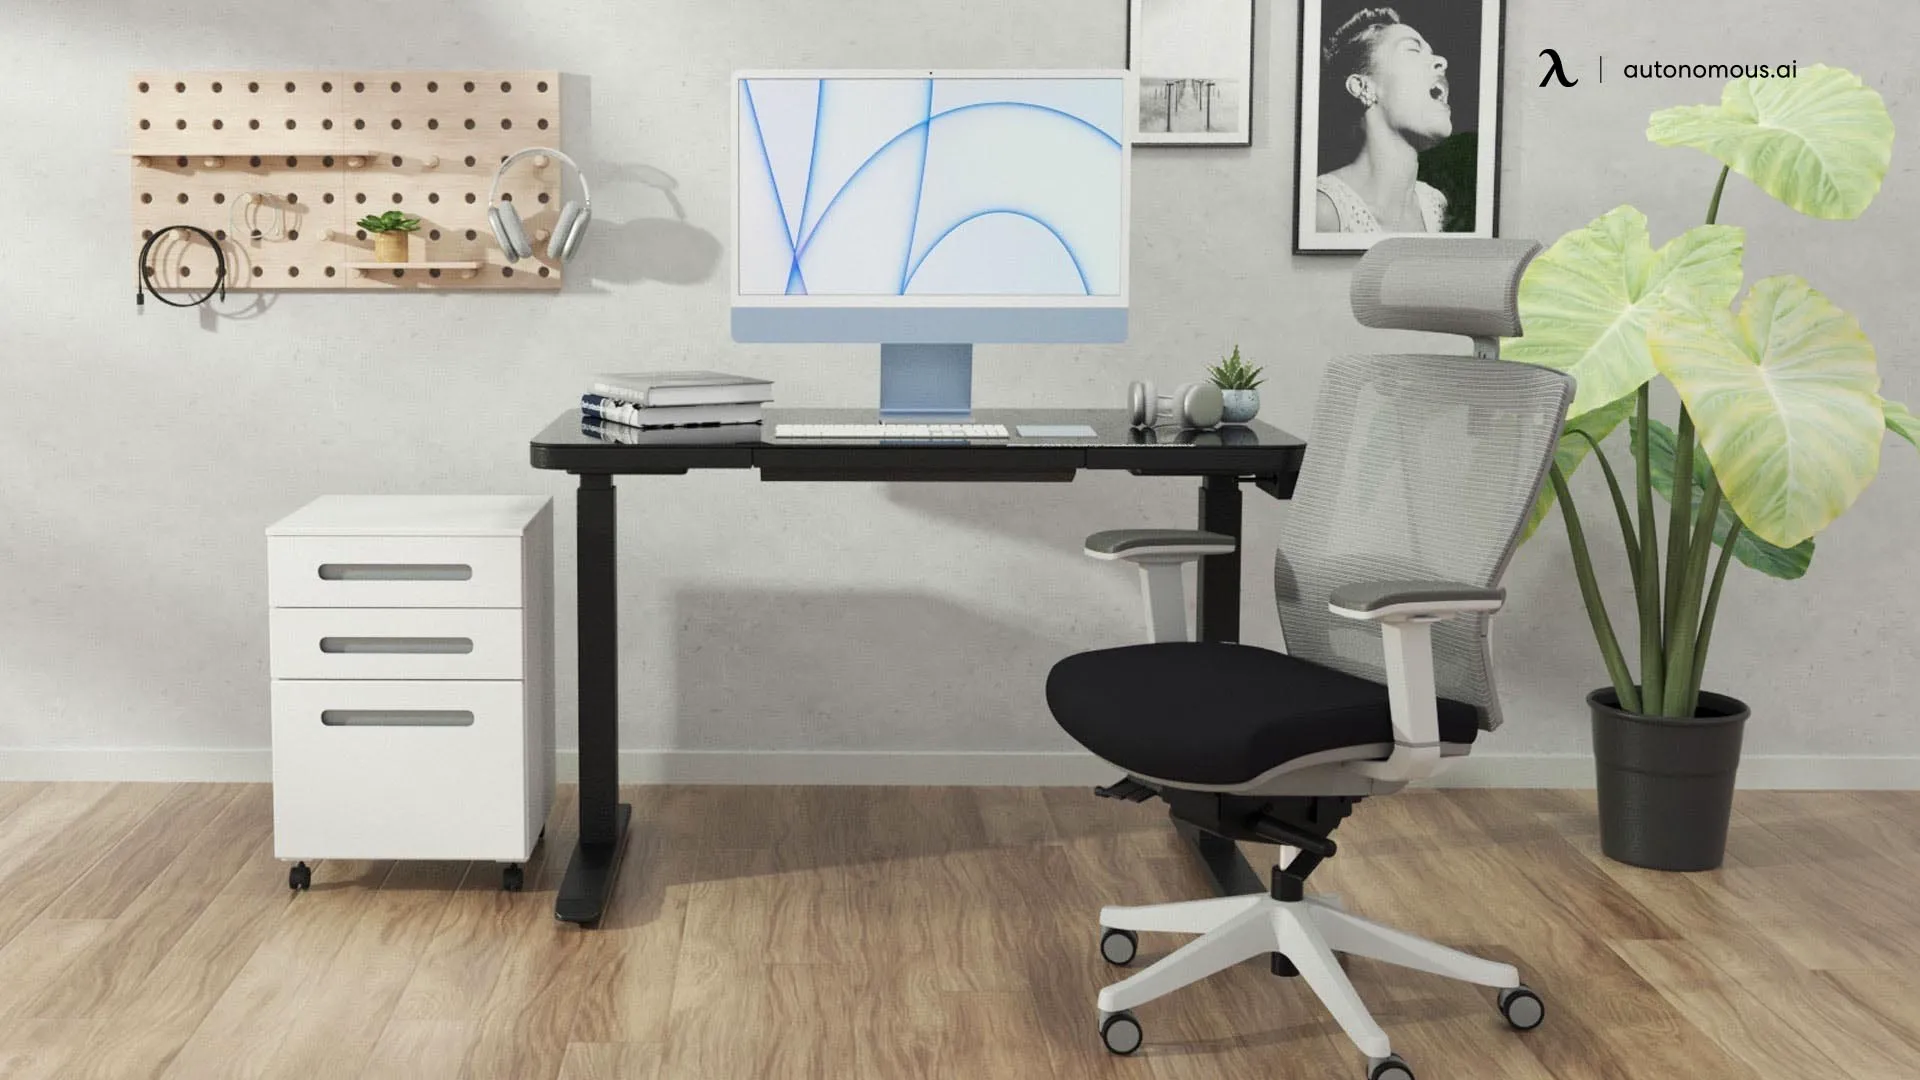 Compact Desk by Wistopht: Wireless Charge Pad